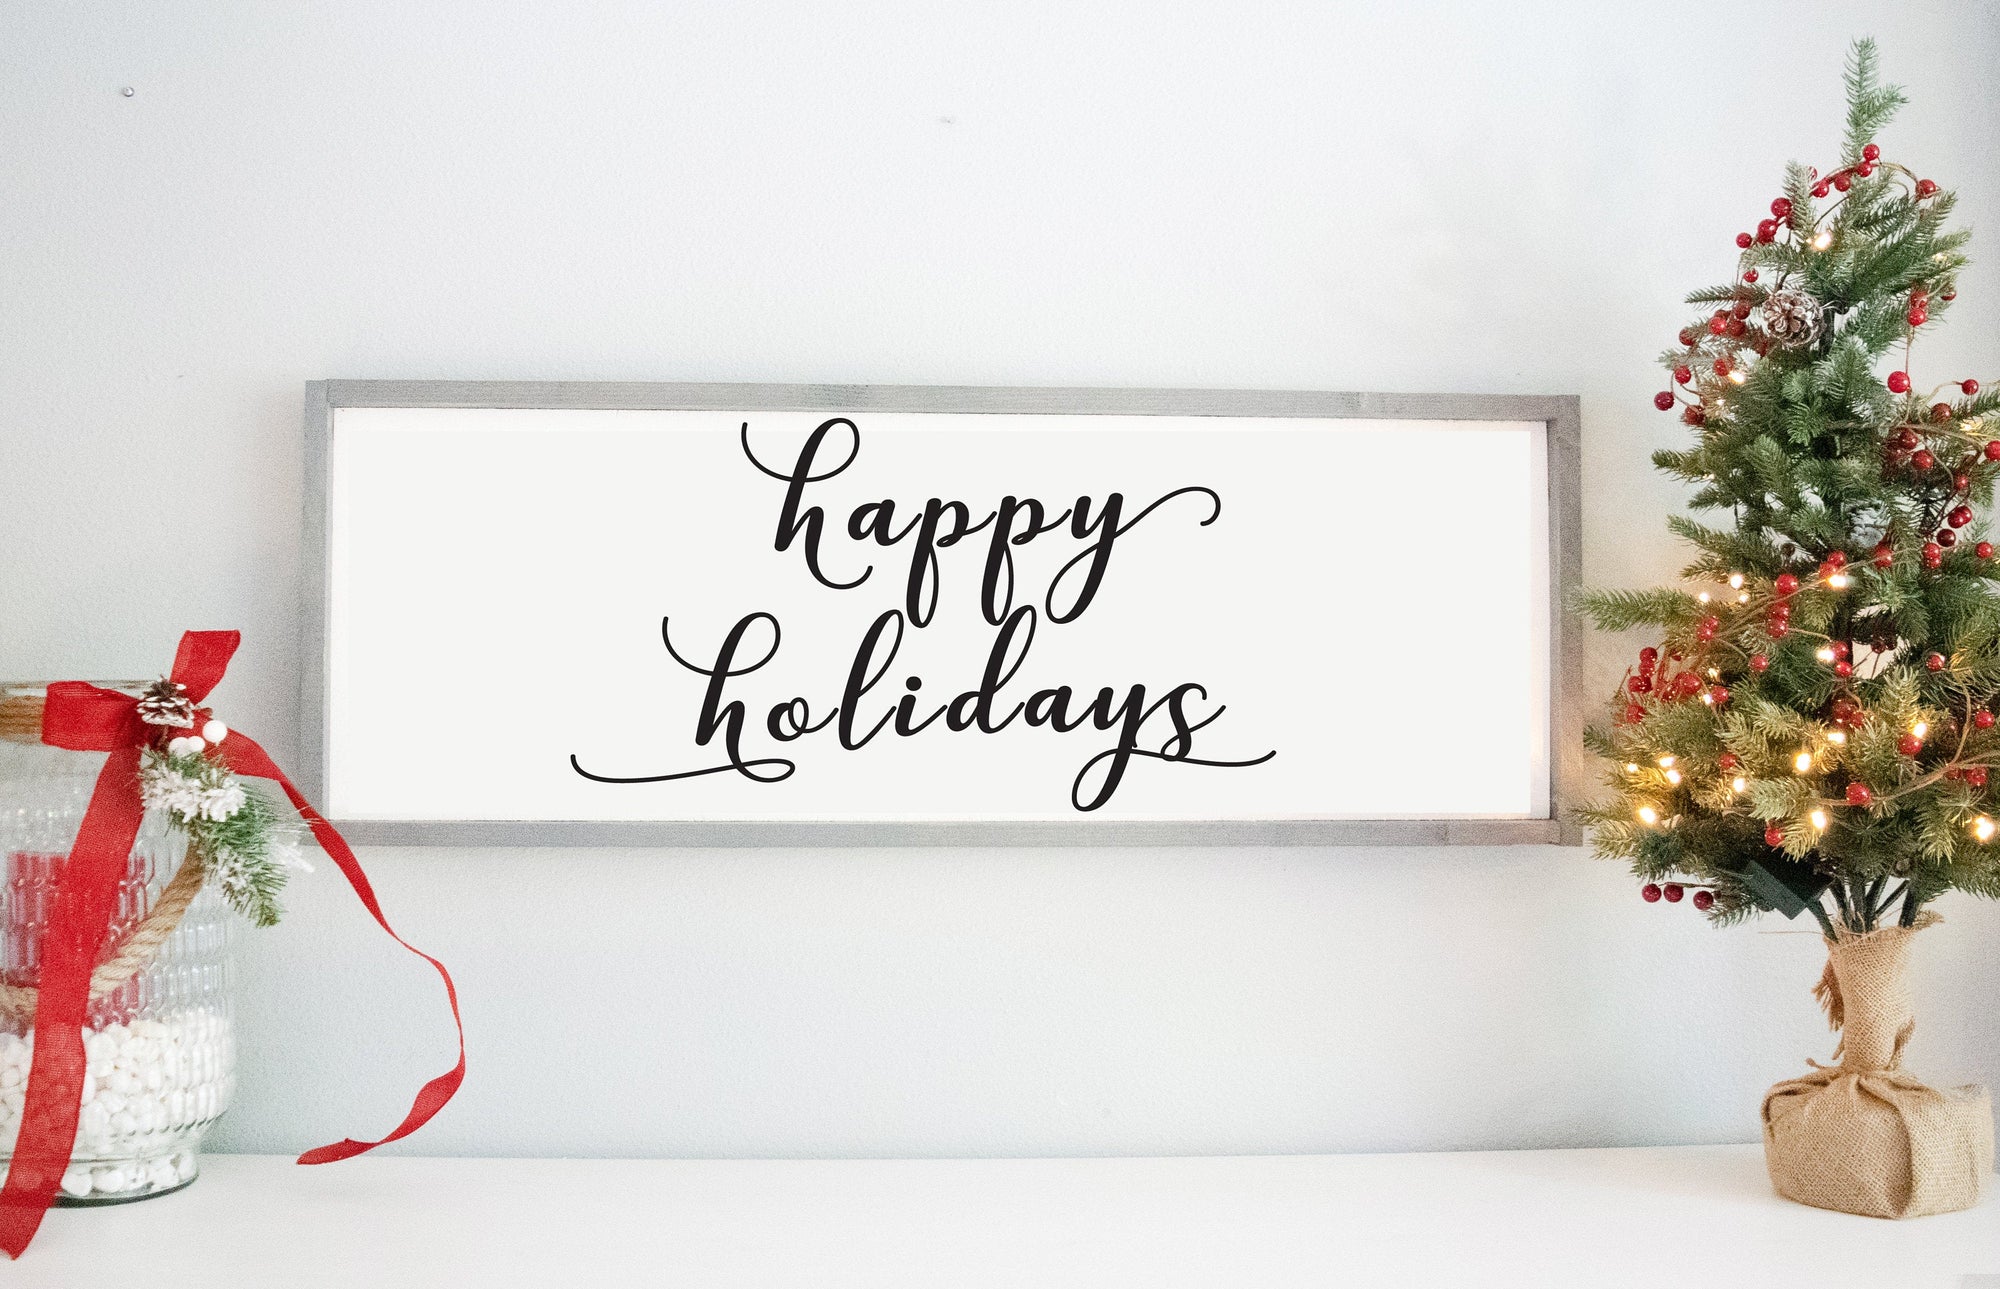 Happy Holidays Wood Sign, Rustic Farmhouse Christmas Home Decor , Personalized Holiday Wall or Mantel Sign, Wooden Christmas Decorations